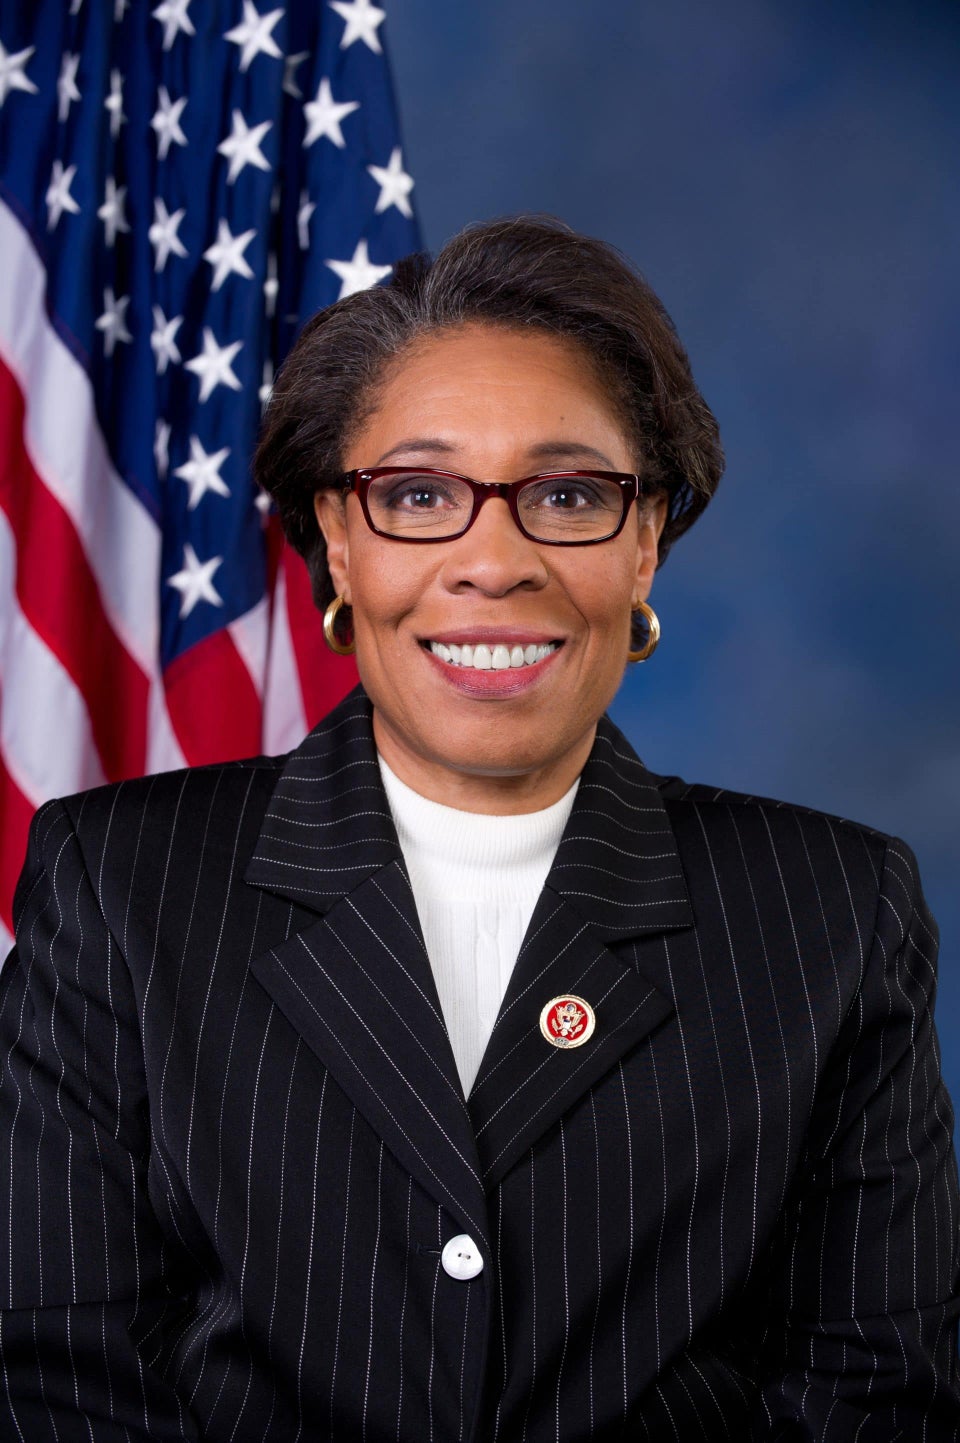 Rep. Marcia Fudge Takes Name Out Of Running For Next House Speaker